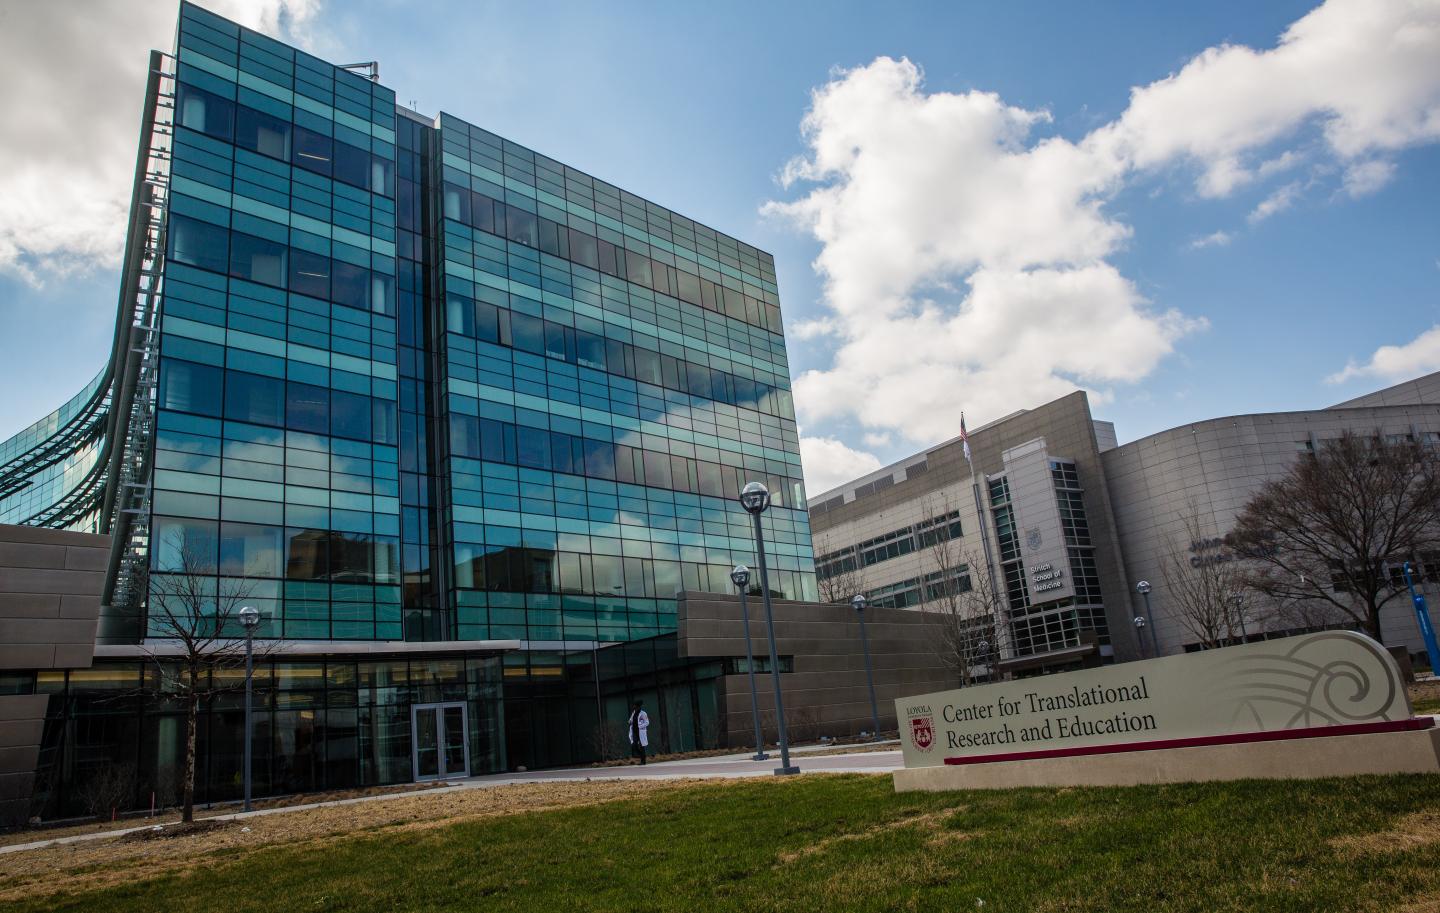 Loyola University Chicago Center for Translational Research and Education